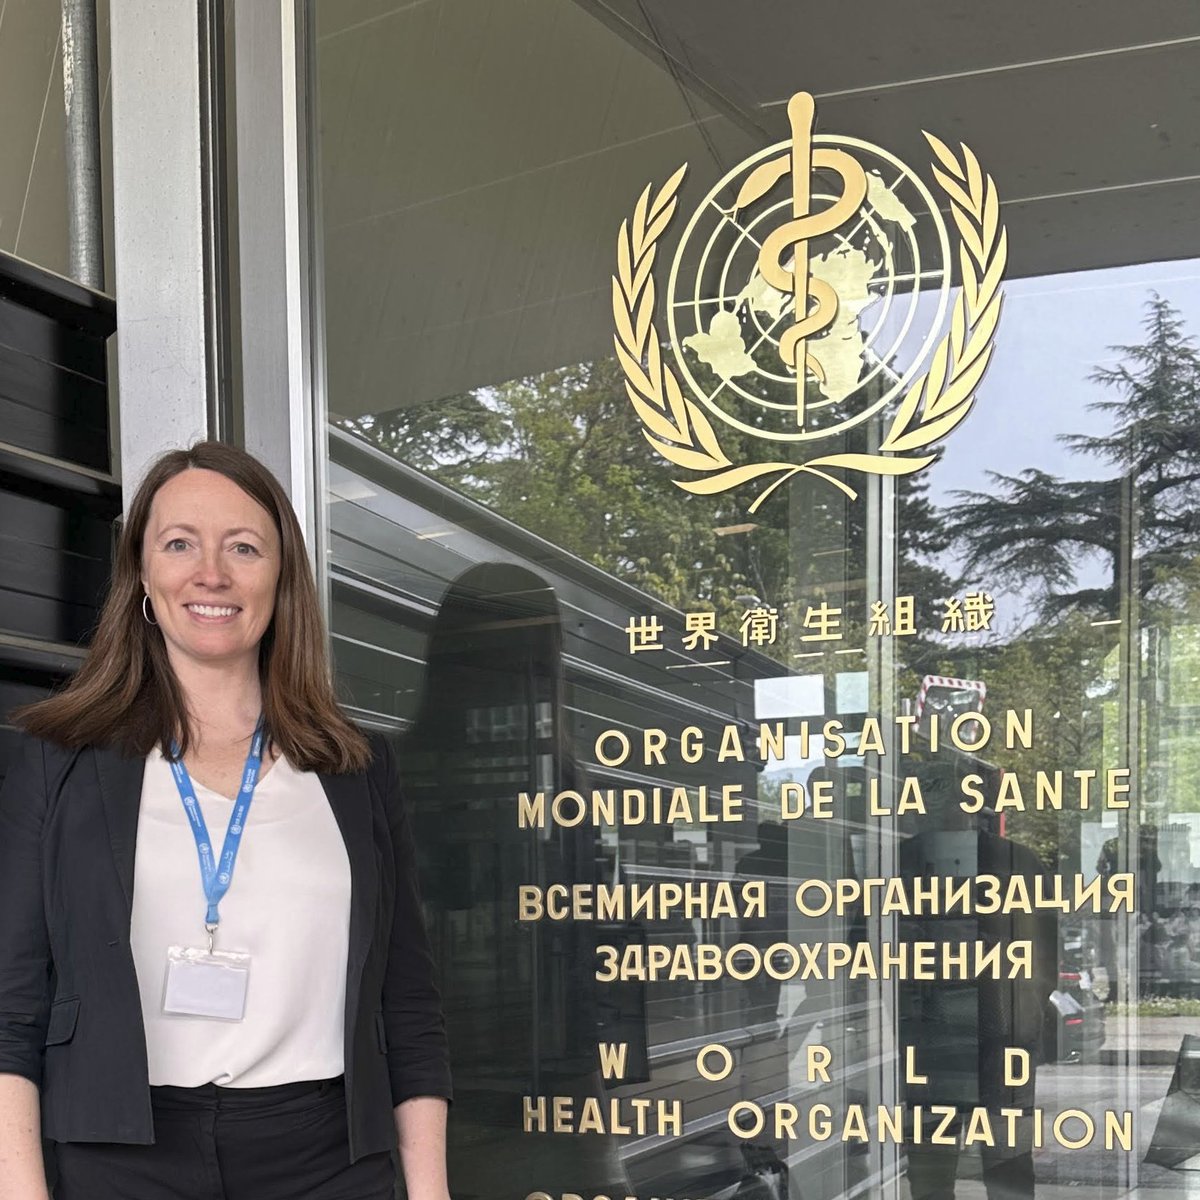 Amazing few days in Geneva with the WHO! Looking forward to next steps! #Diabetes #Pregnancy @AlbertaDiabetes